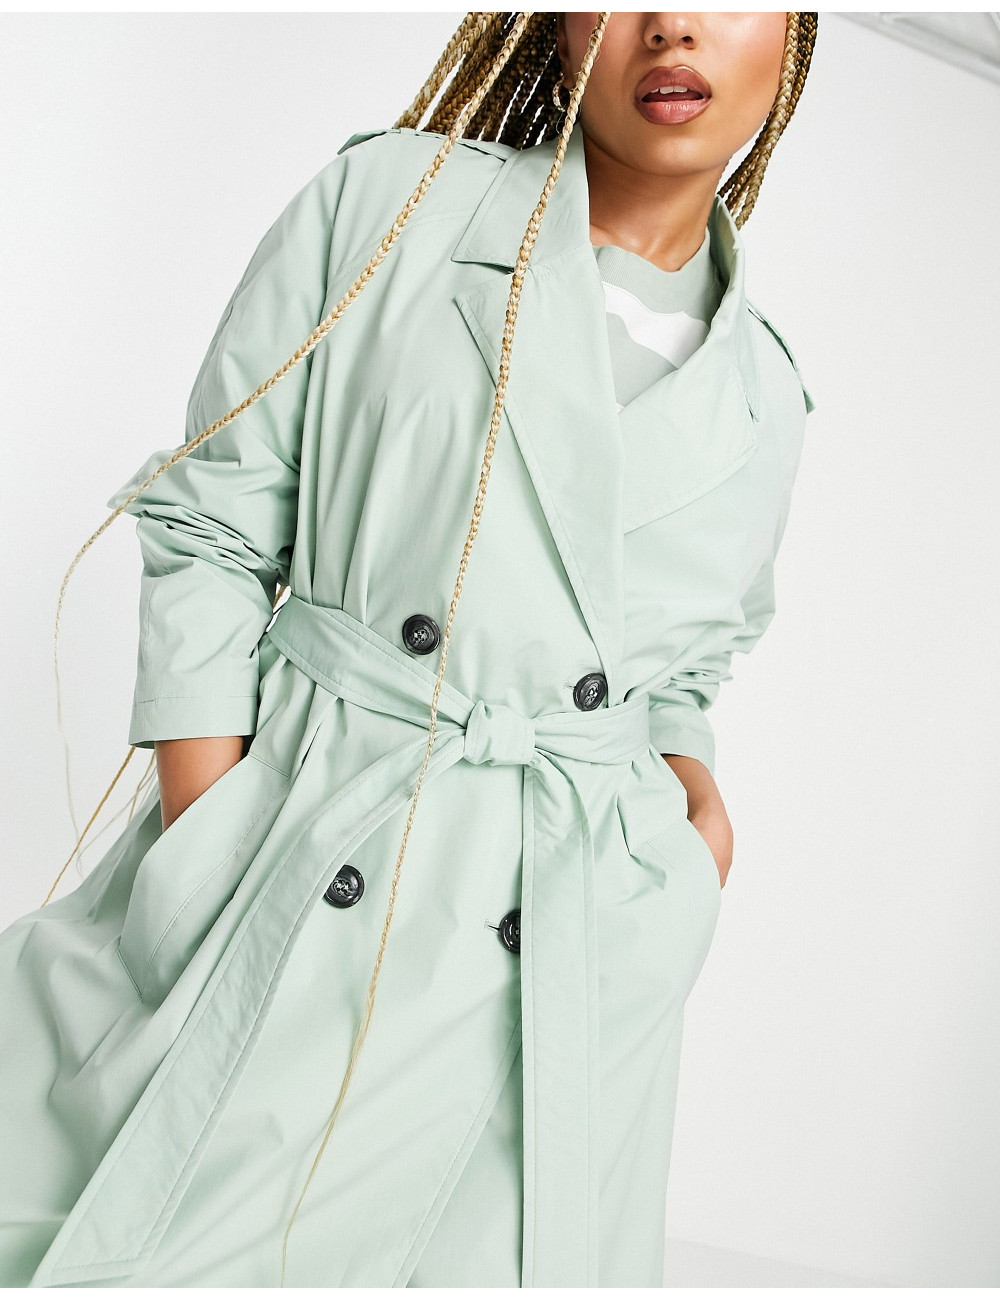 Pimkie belted trench coat...